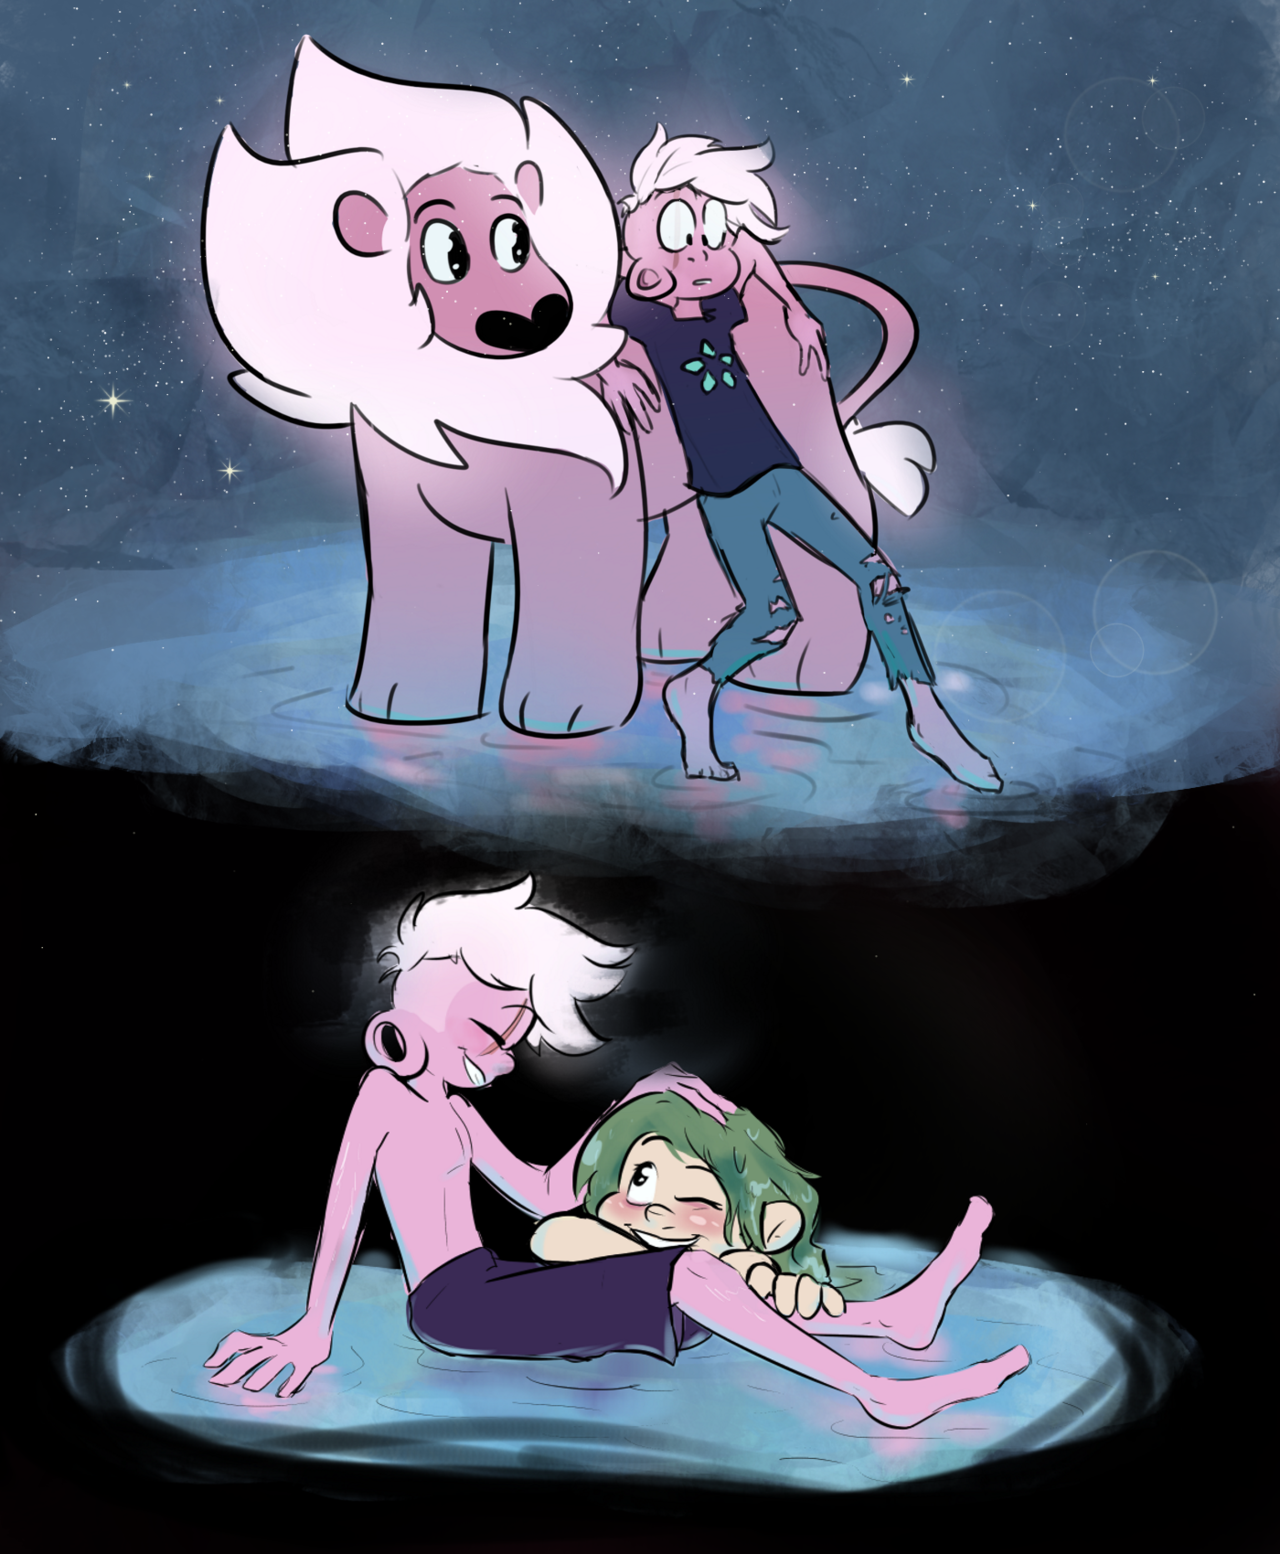 Just some SU stuff, legit Lars needs more screen time. We’ve gotta see some gem powers from him or somethin.